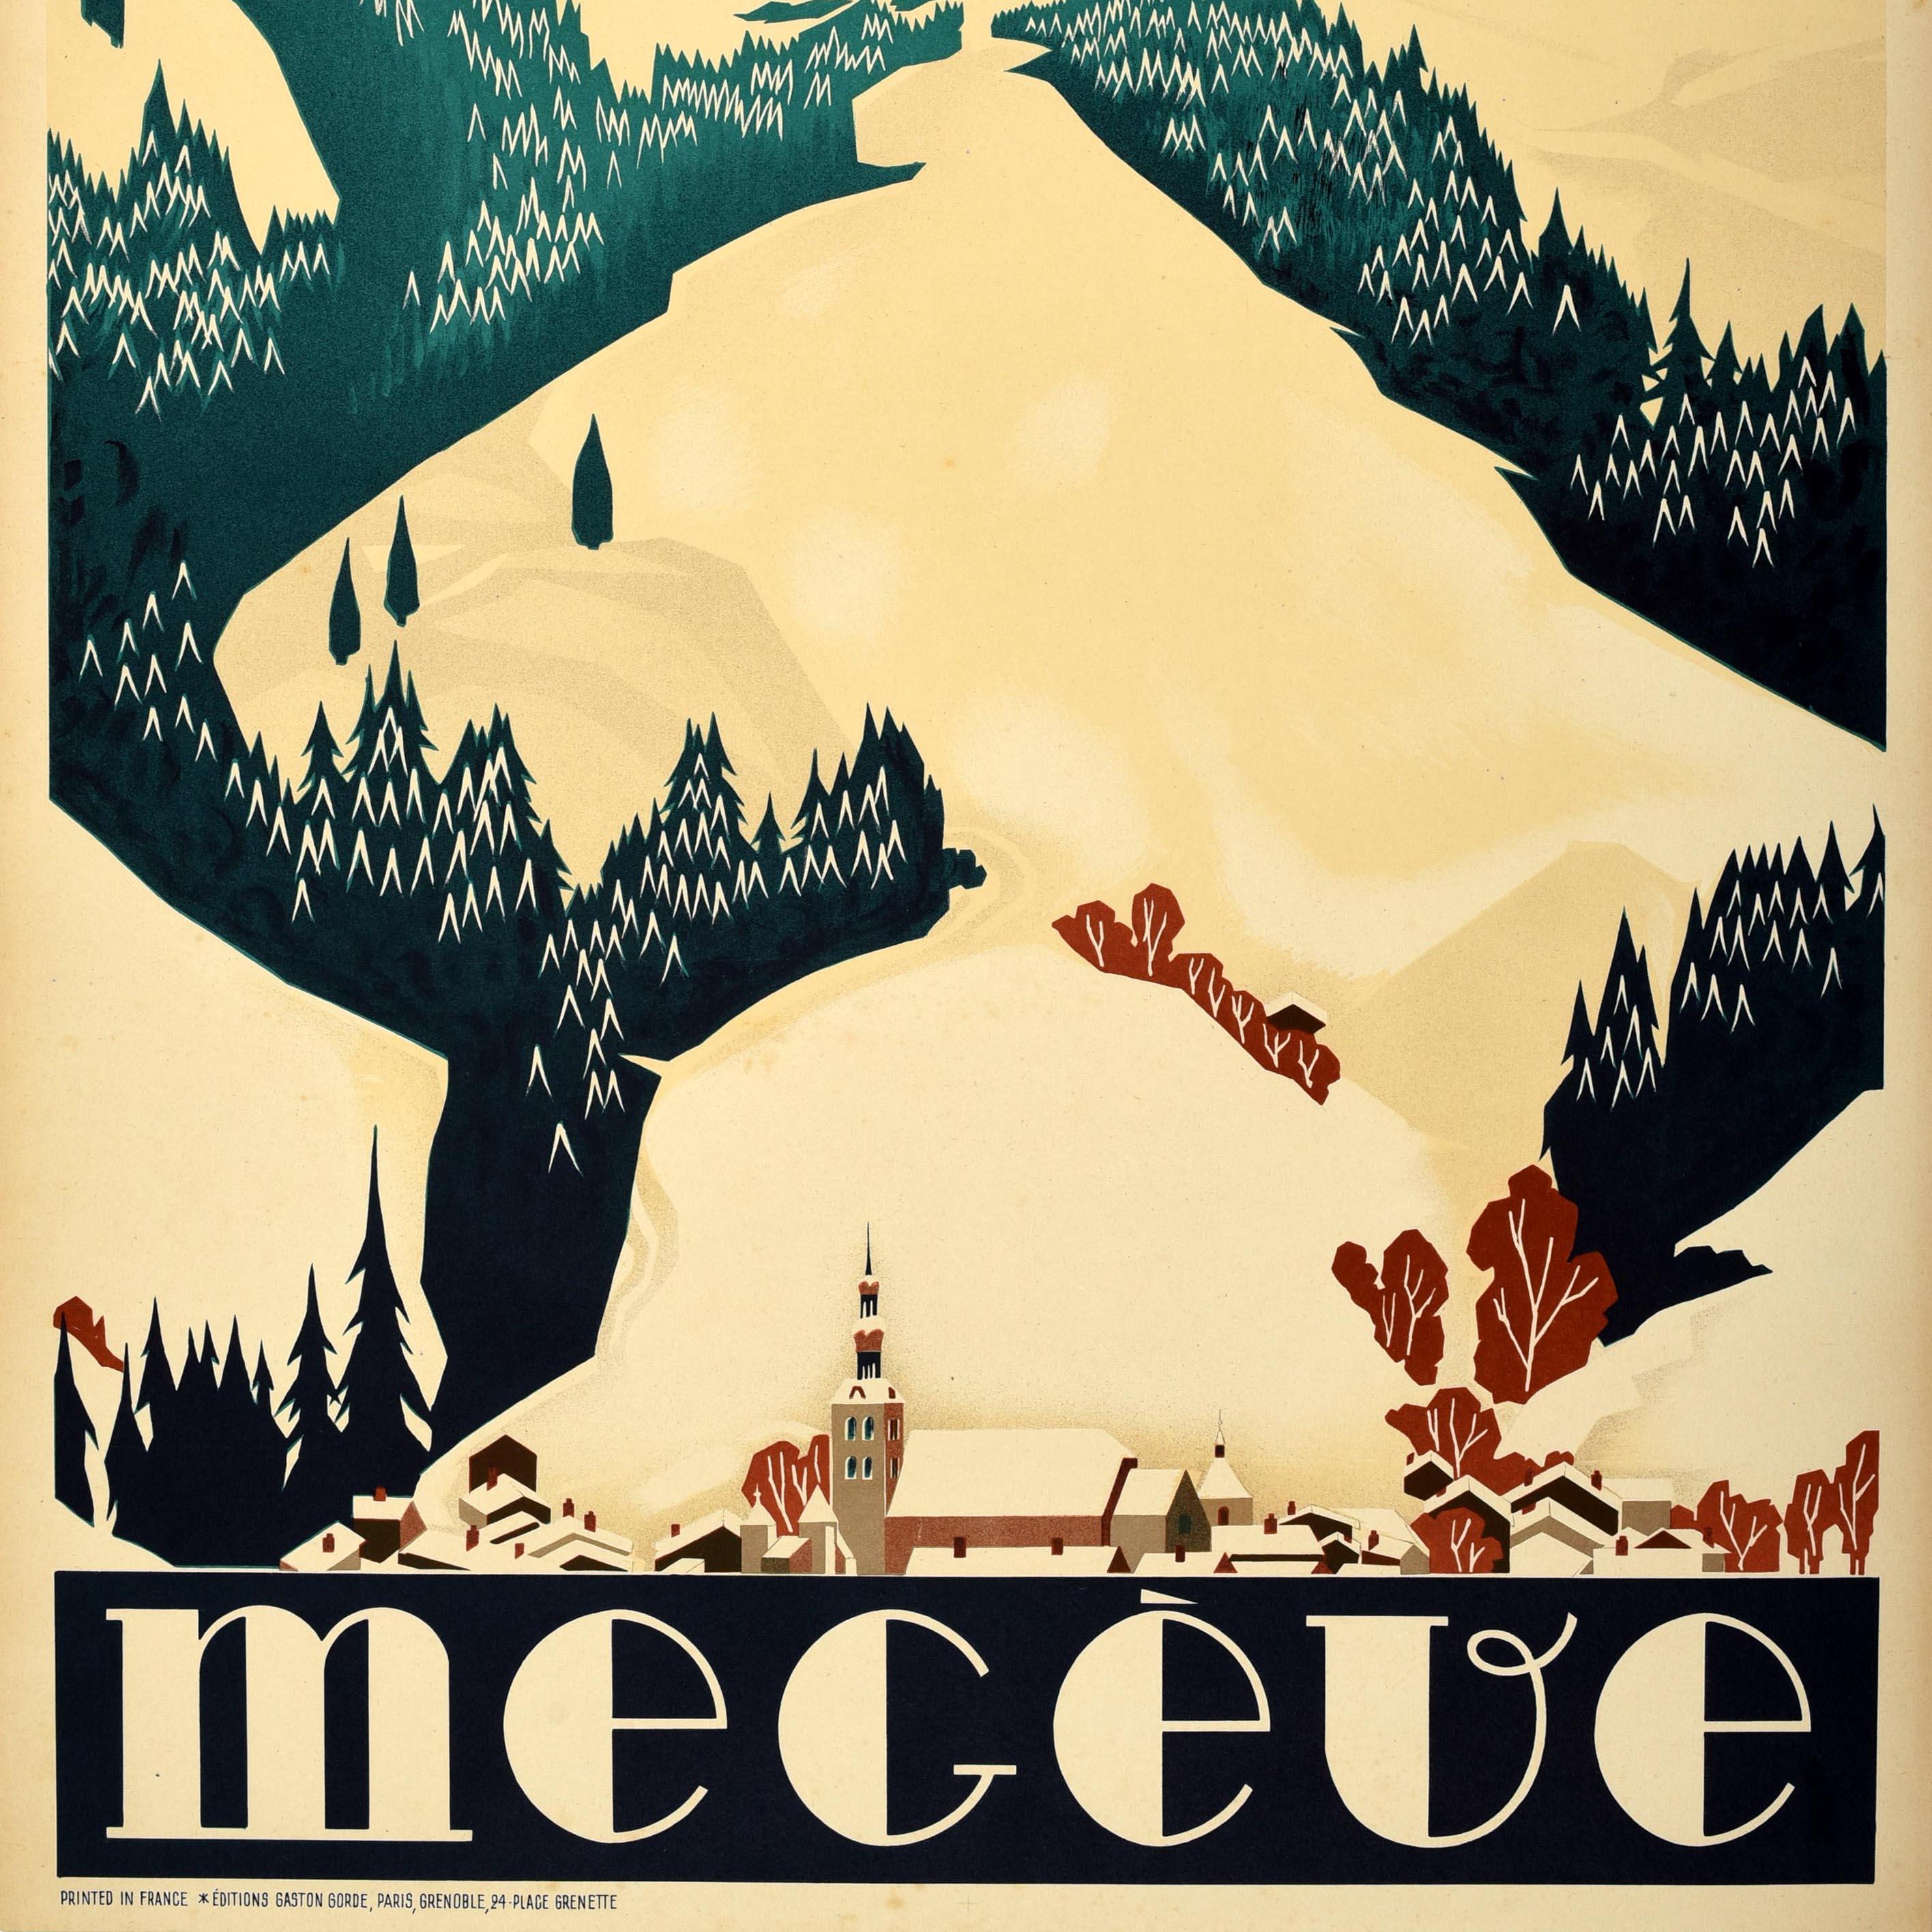 Original vintage travel poster for Megeve issued by the state owned French National Railways (SNCF Societe Nationale des Chemins de Fer Francais; founded 1938) featuring a view of tree lined ski slopes on snow covered mountains below a blue sky with